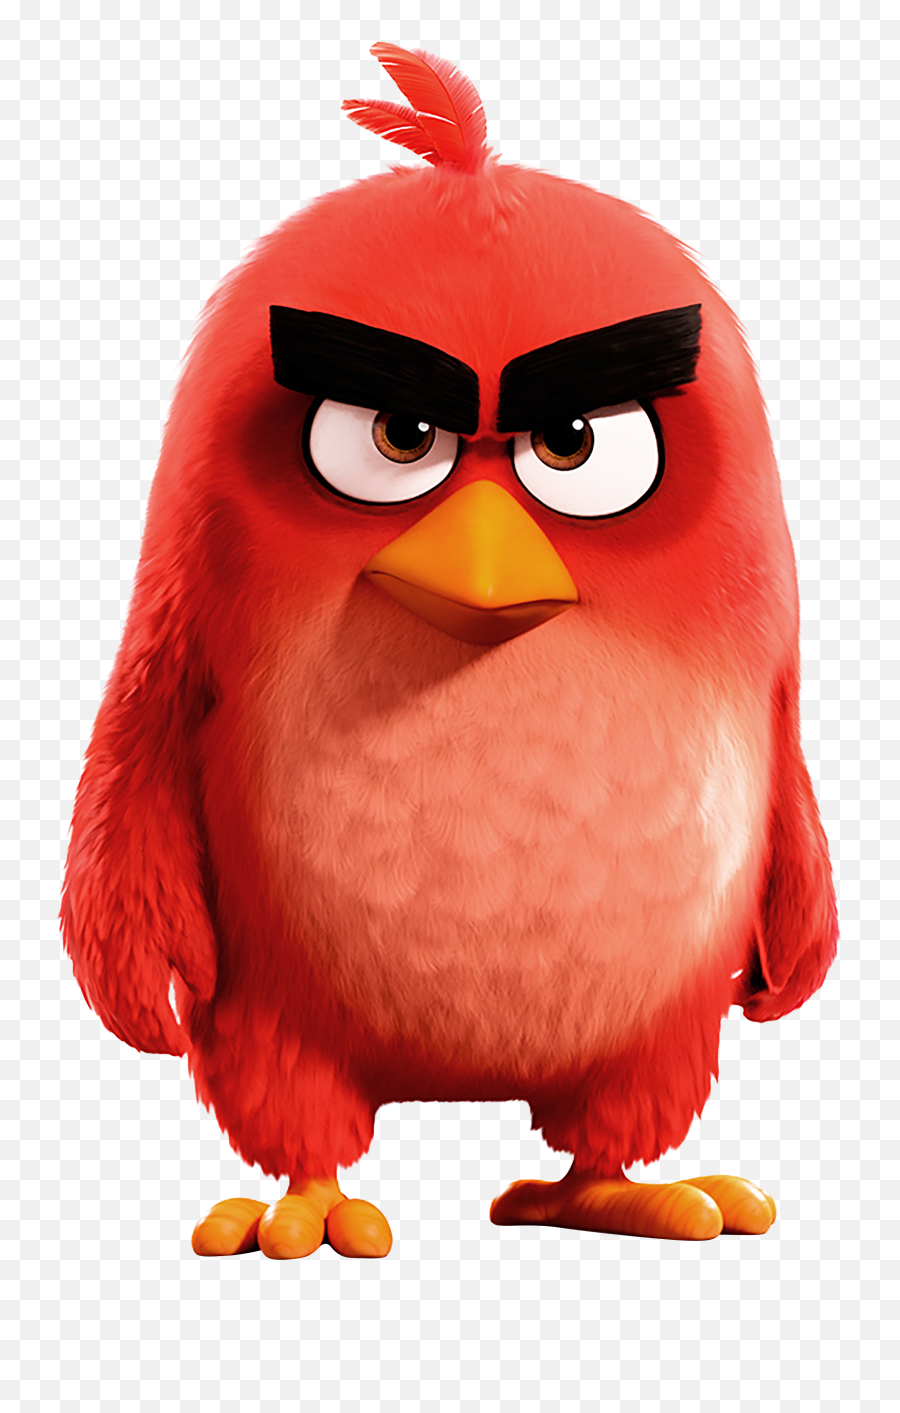 Download Anger Clipart Angry Phone - Red Angry Birds Emoji,Anger Clipart